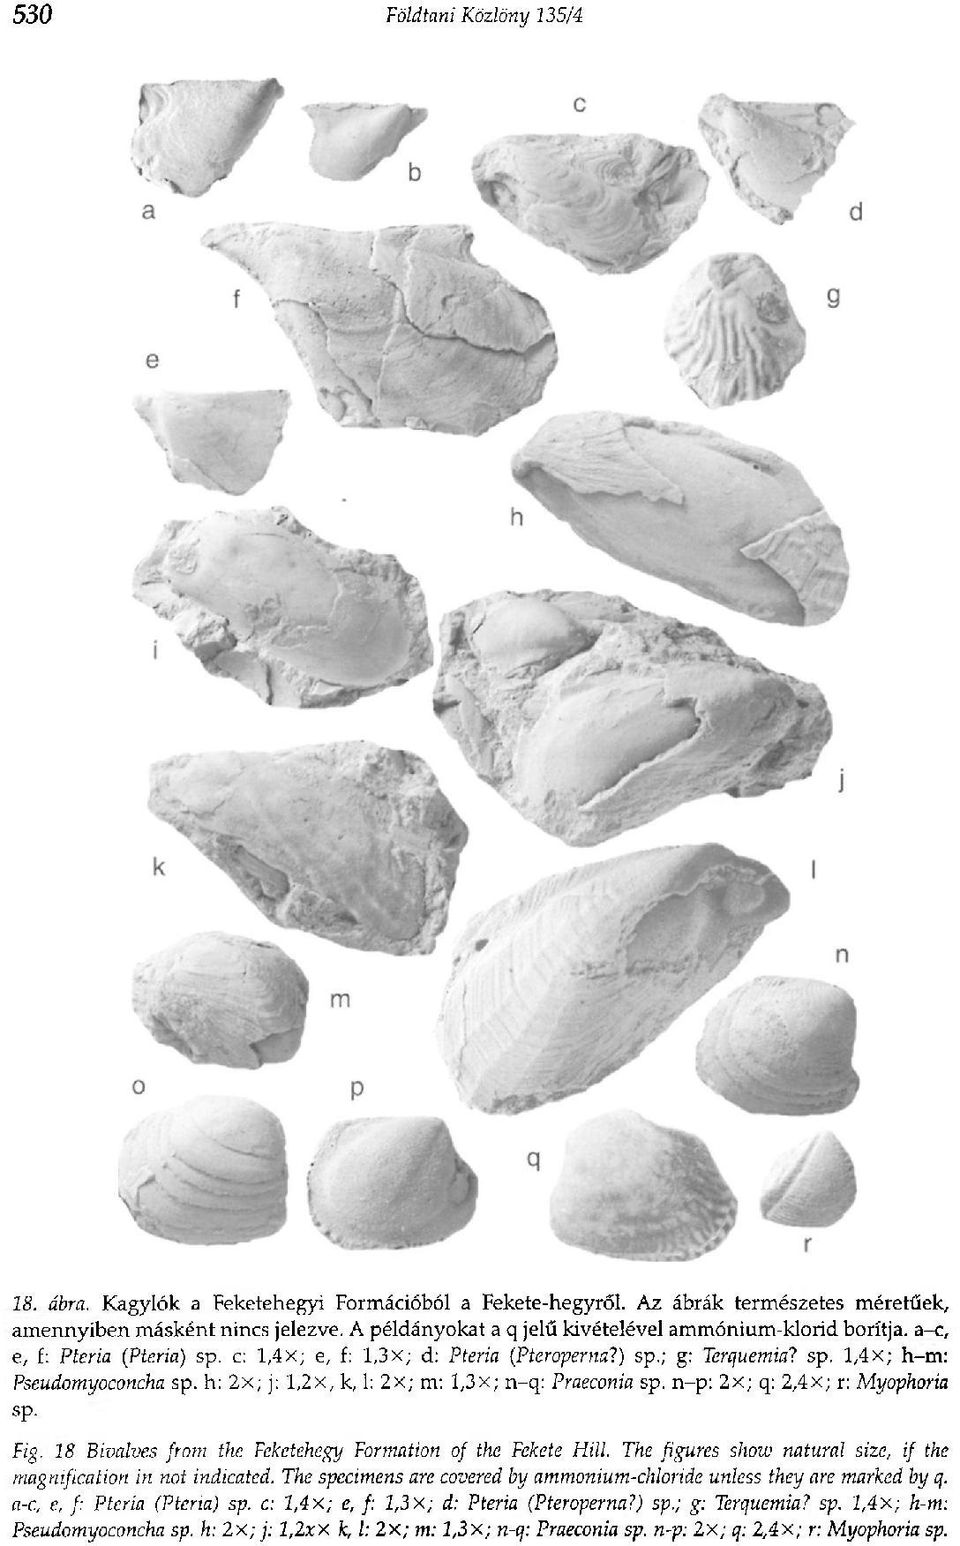 h: 2x; j: l,2x, k, 1: 2x; m: 1,3x; n-q: Praeconia sp. n-p: 2x; q: 2,4x; r: Myophoria sp. Fig. 18 Bivalves from the Feketehegy Formation of the Fekete Hill.